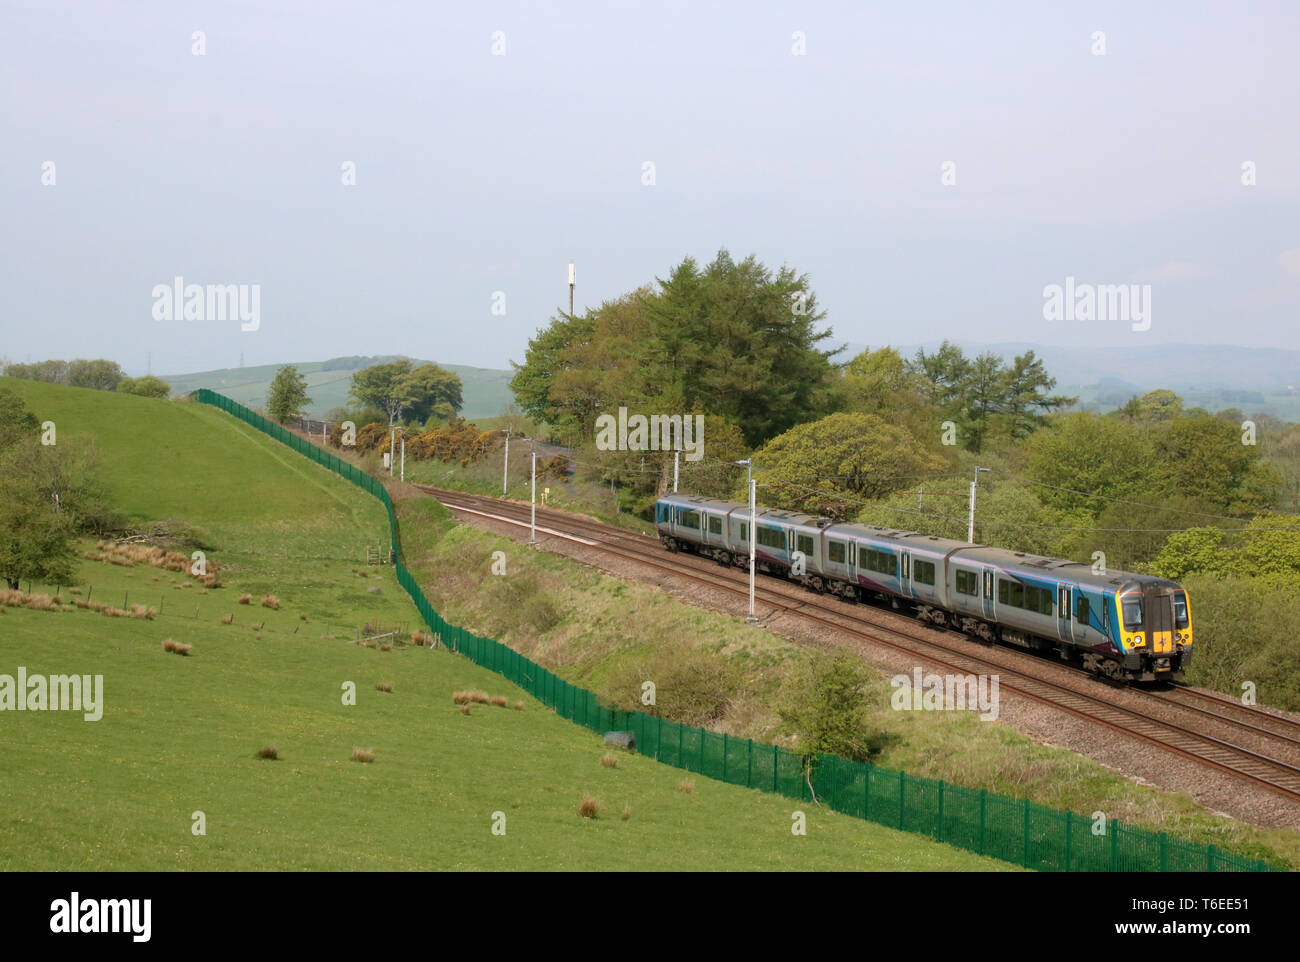 Class 350 Siemens Desiro emu train 350 405 operated by TransPennine Express passing Grayrigg in Cumbria on the West Coast Mainline on 30th April 2019. Stock Photo